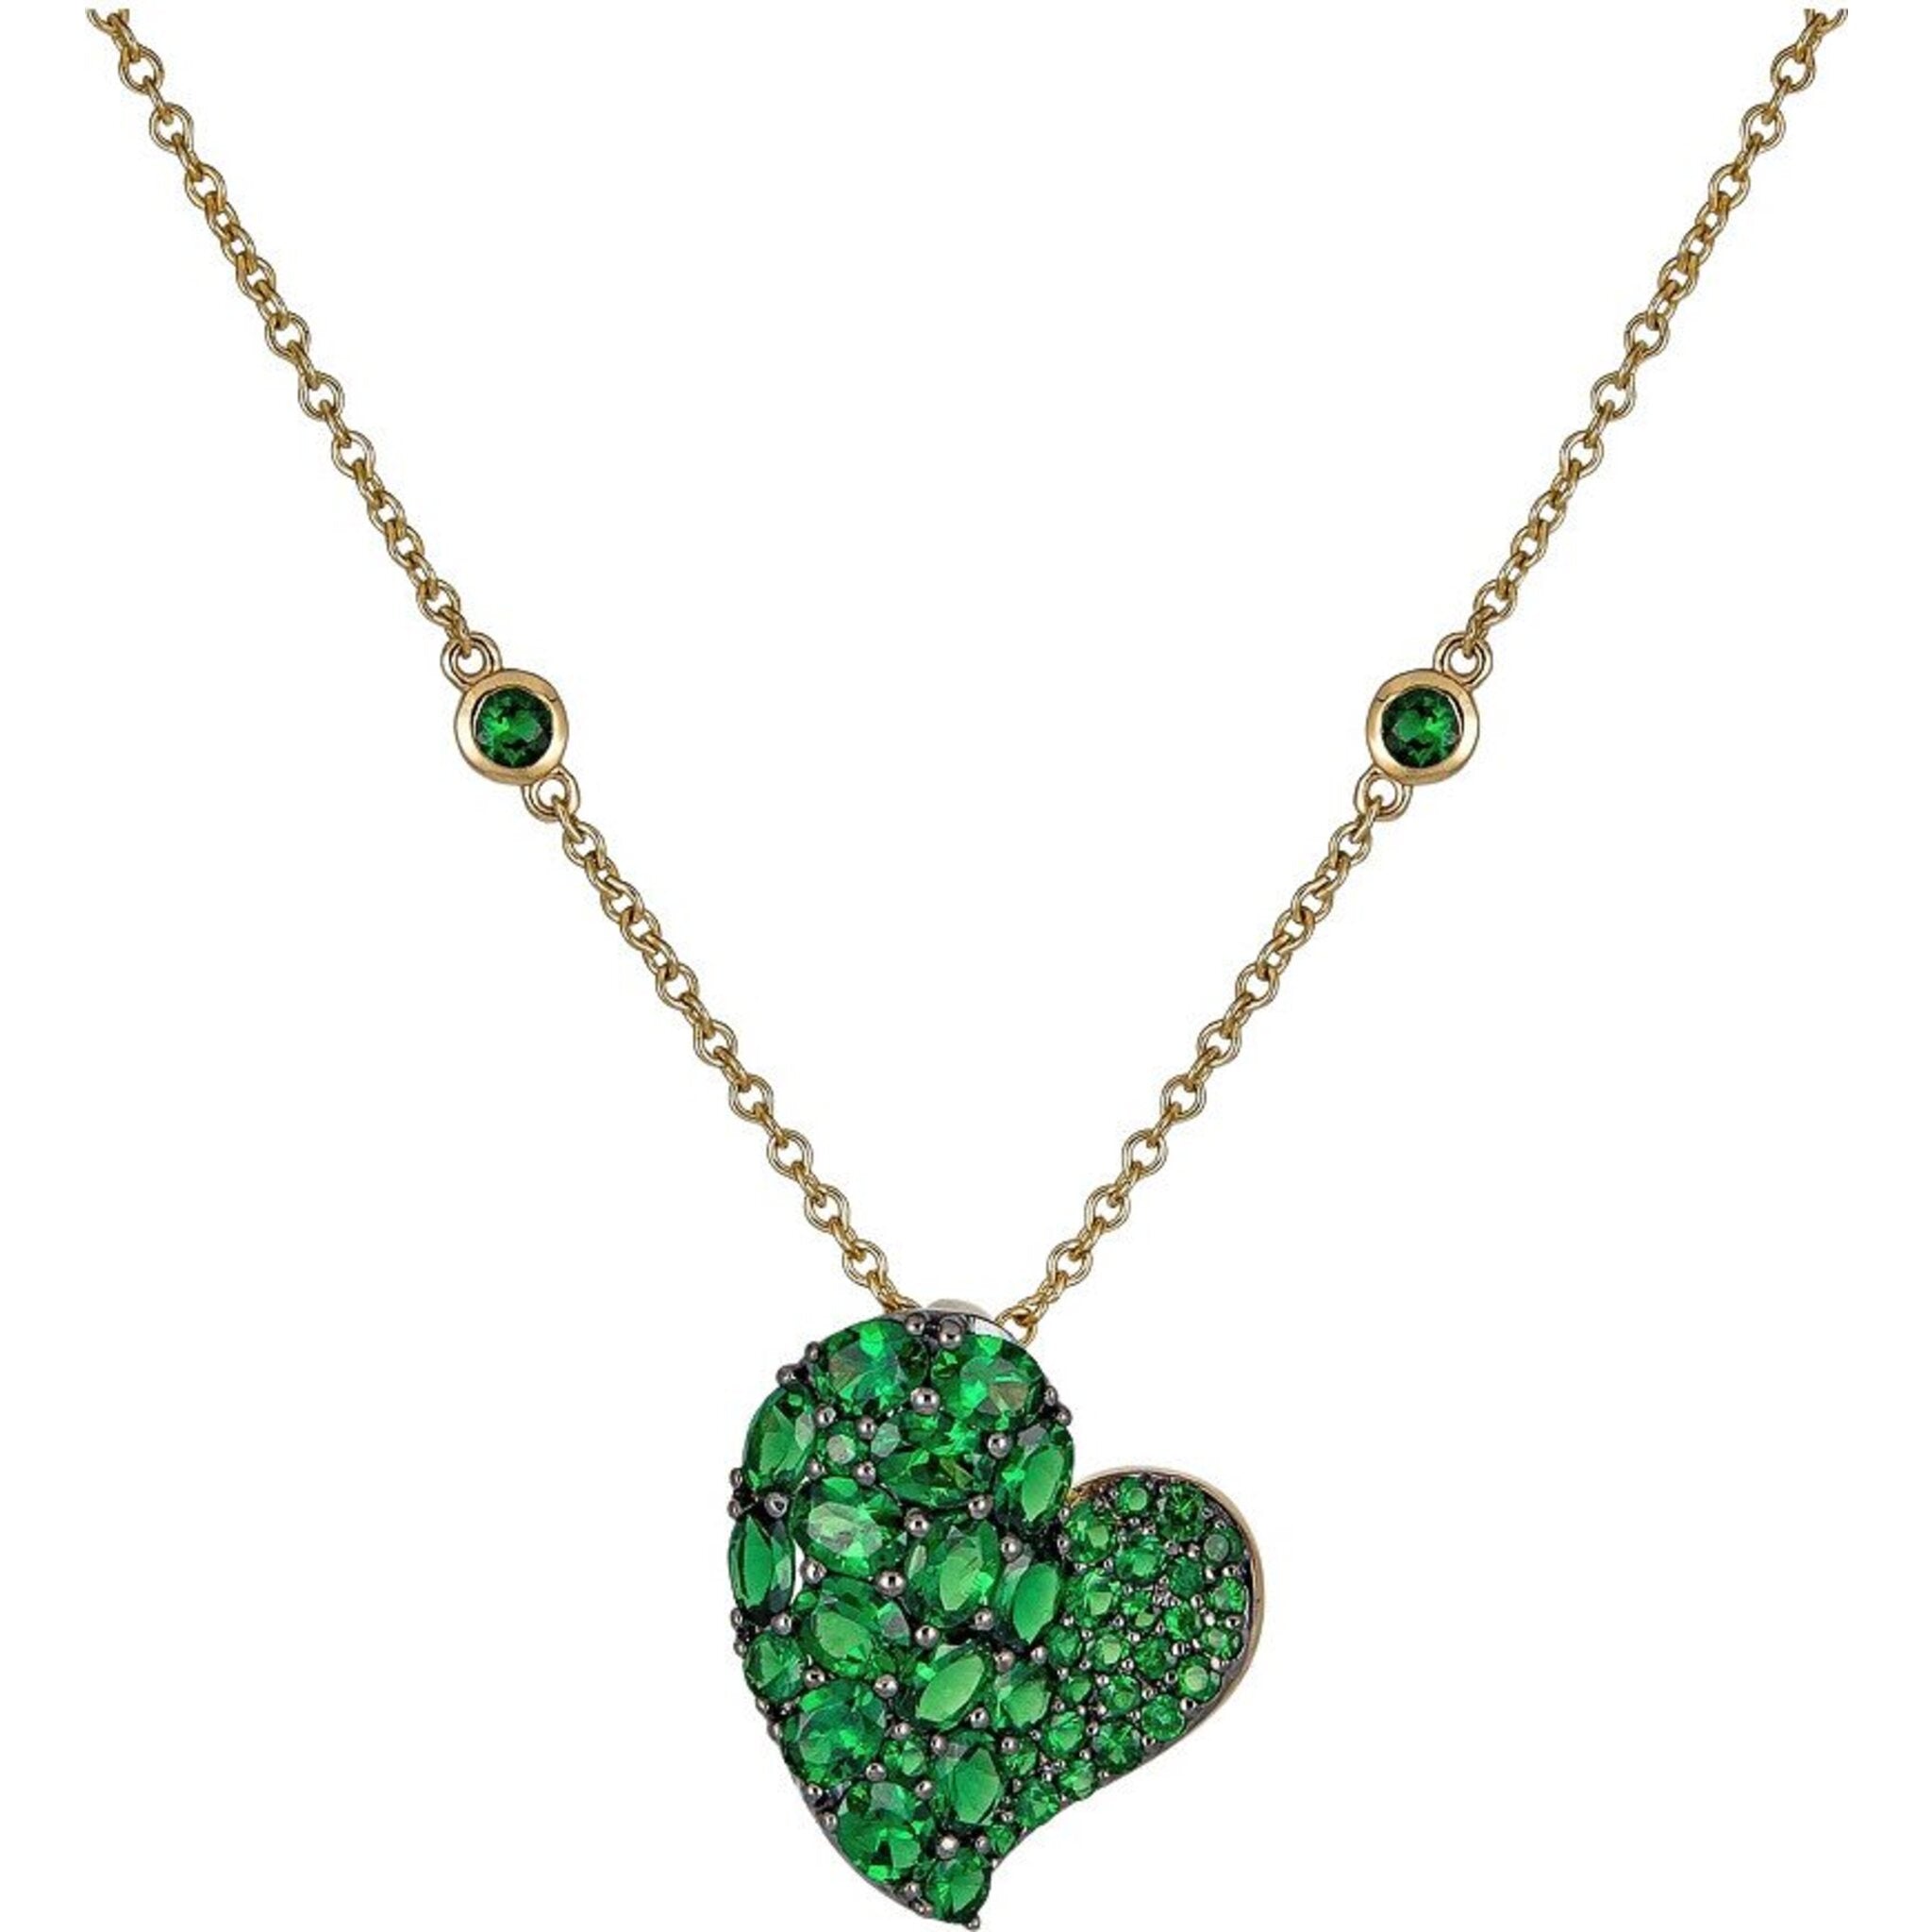 Green Emerald Heart Pendant Necklace - The M Jewelers